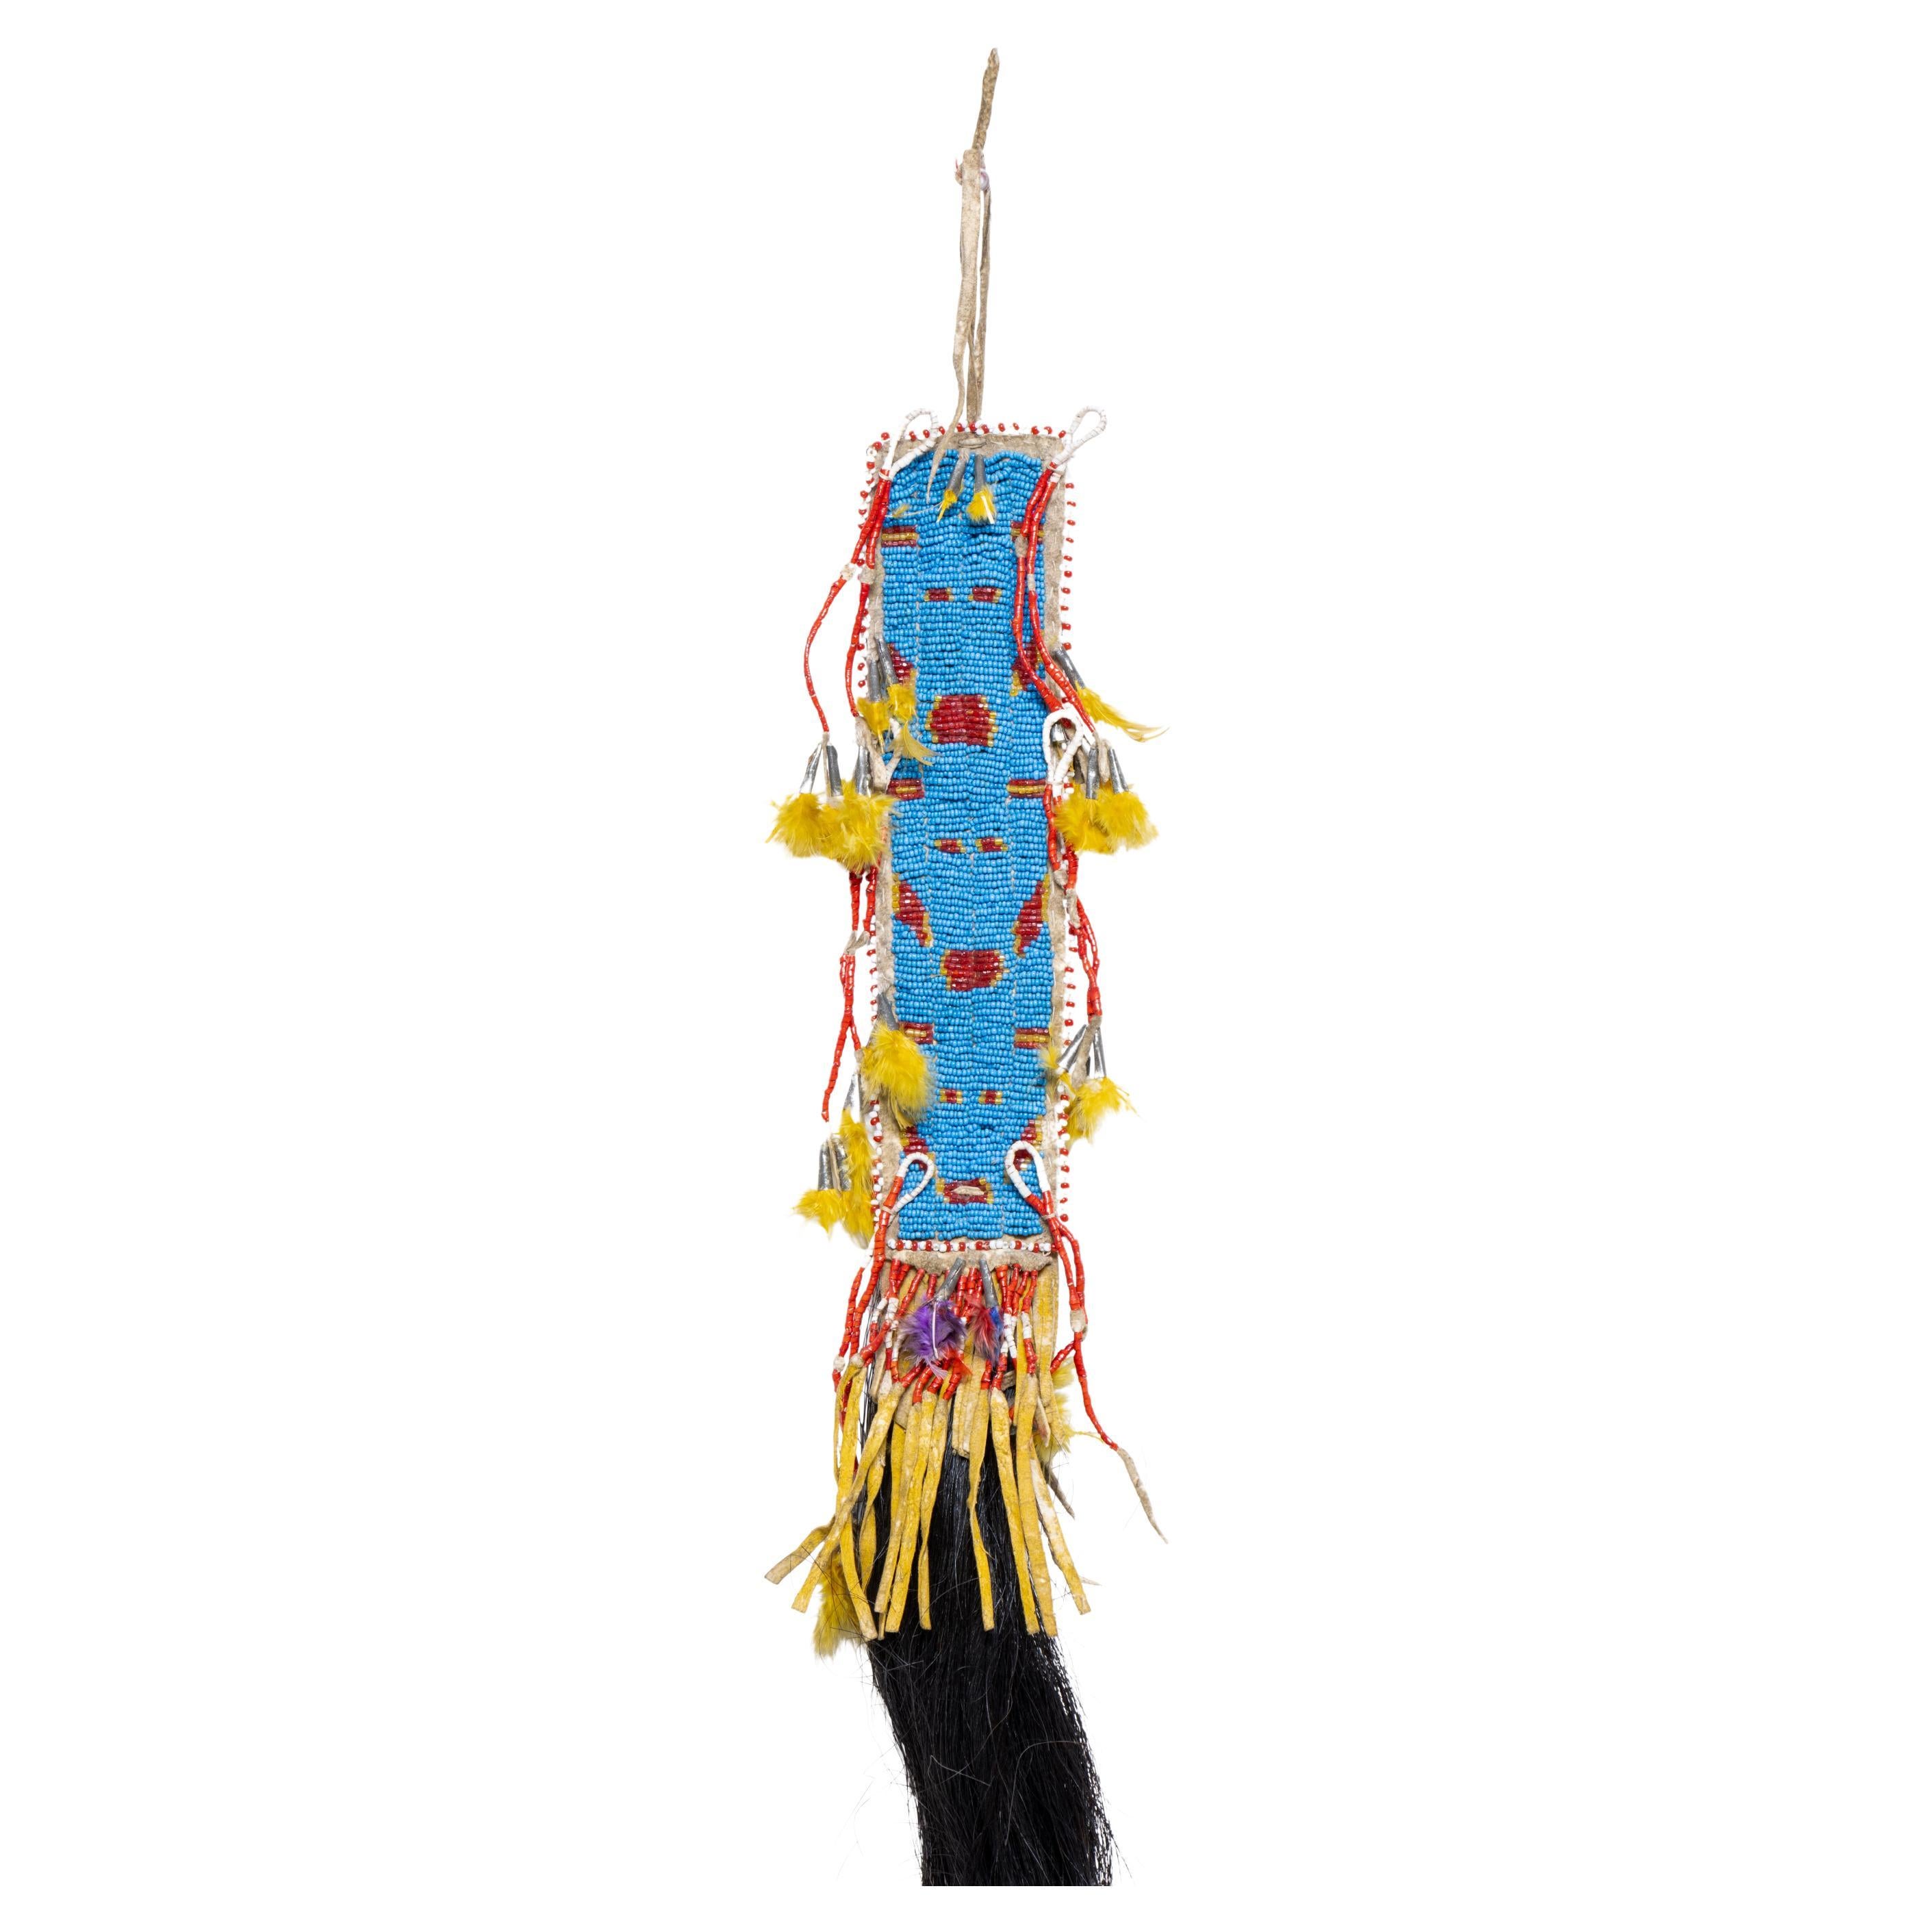 Northern Plains hair drop. Beaded blue with red accents. Quilled drops having tin cones and yellow feather fluffs with long black horsehair drop.

Period:  19th century
Origin: Great Plains - Northern Plains, Native American
Size: 6